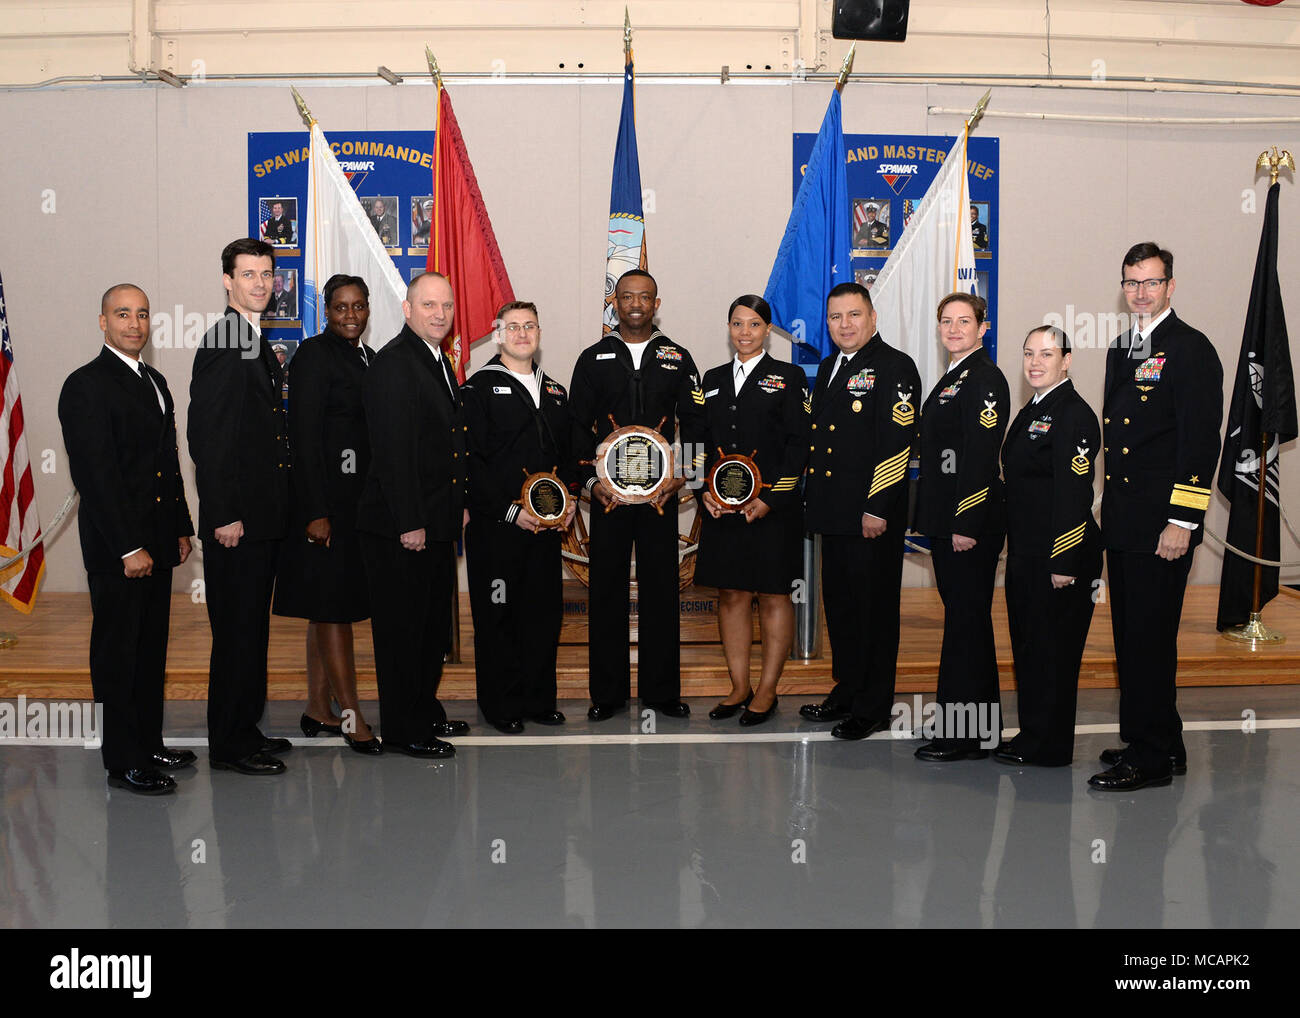 180202-N-UN340-005 SAN DIEGO (Feb. 2, 2018) Rear Adm. Christian 'Boris' Becker, right, commander, Space and Naval Warfare Systems Command (SPAWAR), SPAWAR Command Master Chief Pablo Cintron, left, and members of the SPAWAR Chief Petty Officers Mess pictured with the 2017 SPAWAR Sailor of the Year Logistics Specialist 1st Class John Myers, center.  Also pictured are SOY candidates Aviation Maintenance Administrationman 1st Class Yanda-Kalie Edwards and Information Systems Technician 1st Class Ryan Bertie.  (U.S. Navy photo by Rick Naystatt/Released) Stock Photo